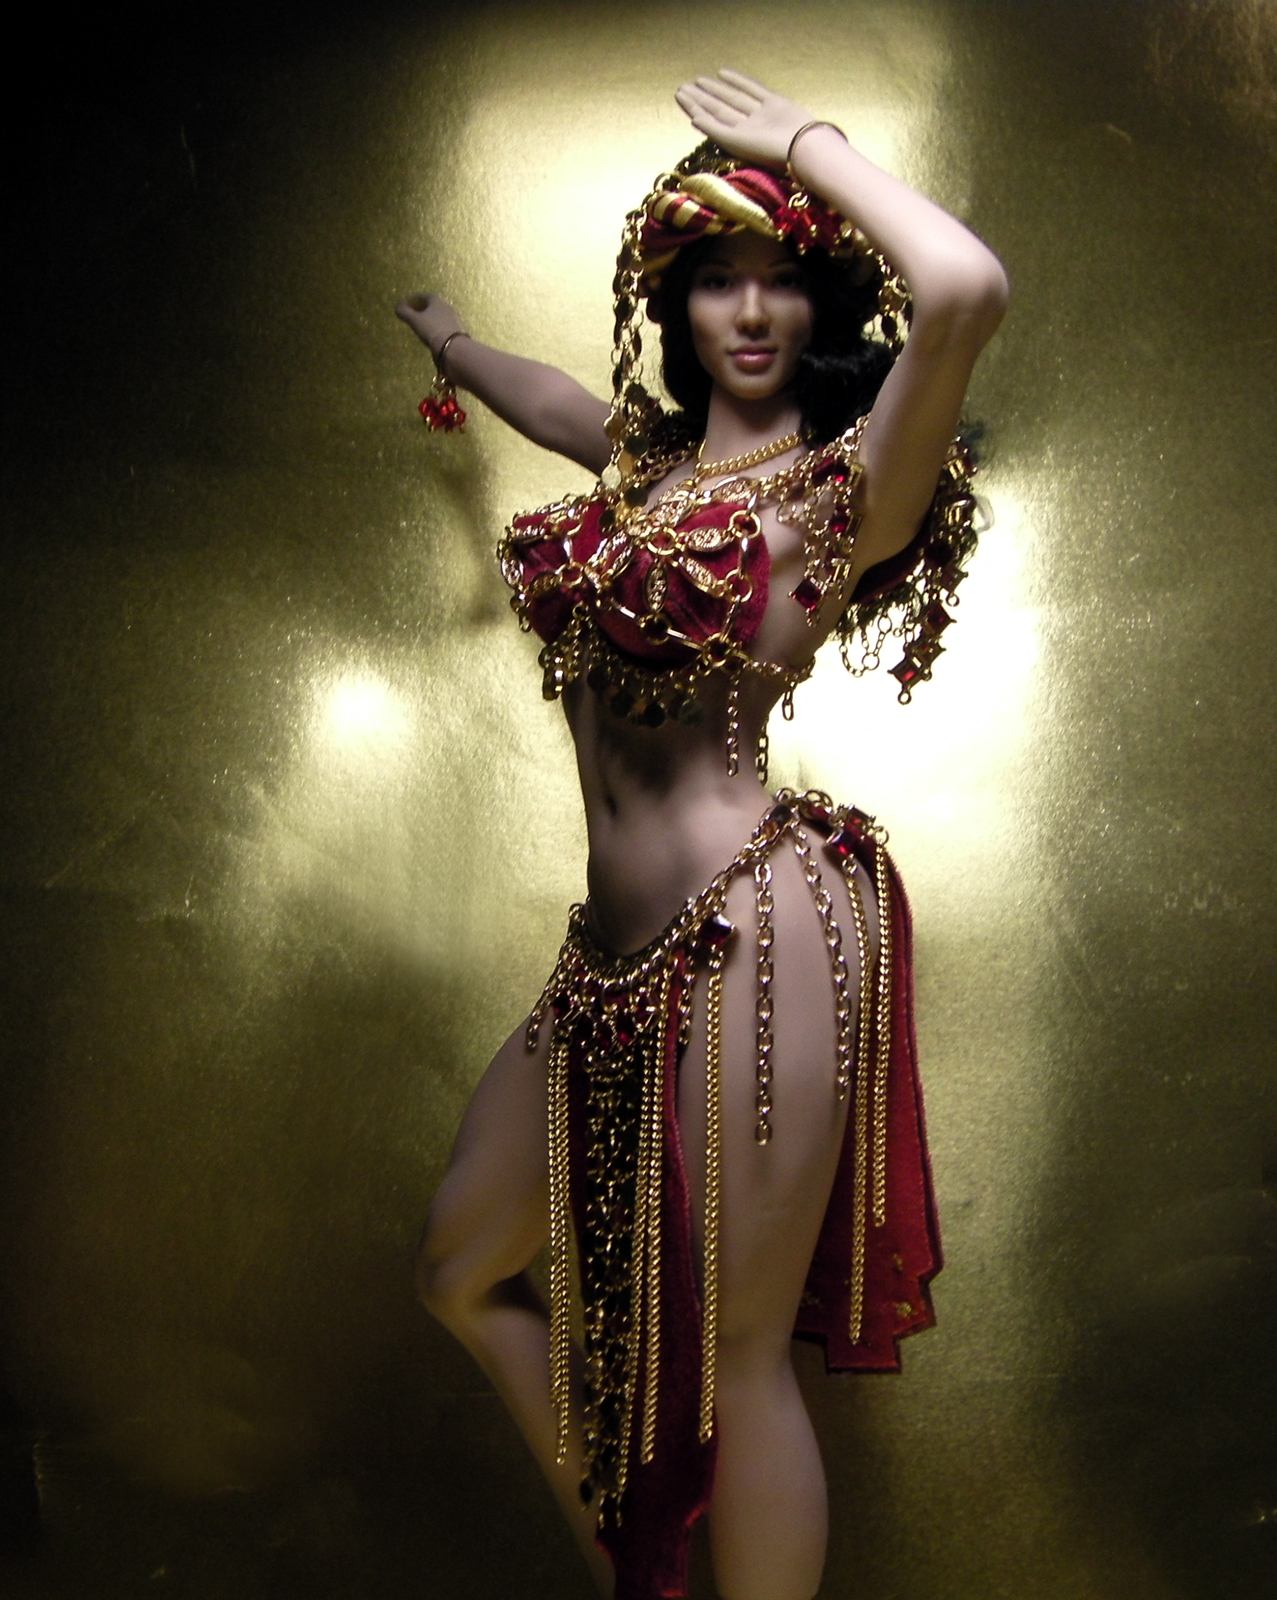 Continuation of the post Harem of the Sultan in Miniature - My, Body, belly dance, Historical costume, Gladiator, Nudity, Topless, Hurrem Sultan, Decoration, Armor, Jointed doll, Phicen, Dollhouse, Reply to post, Longpost, Video, Youtube